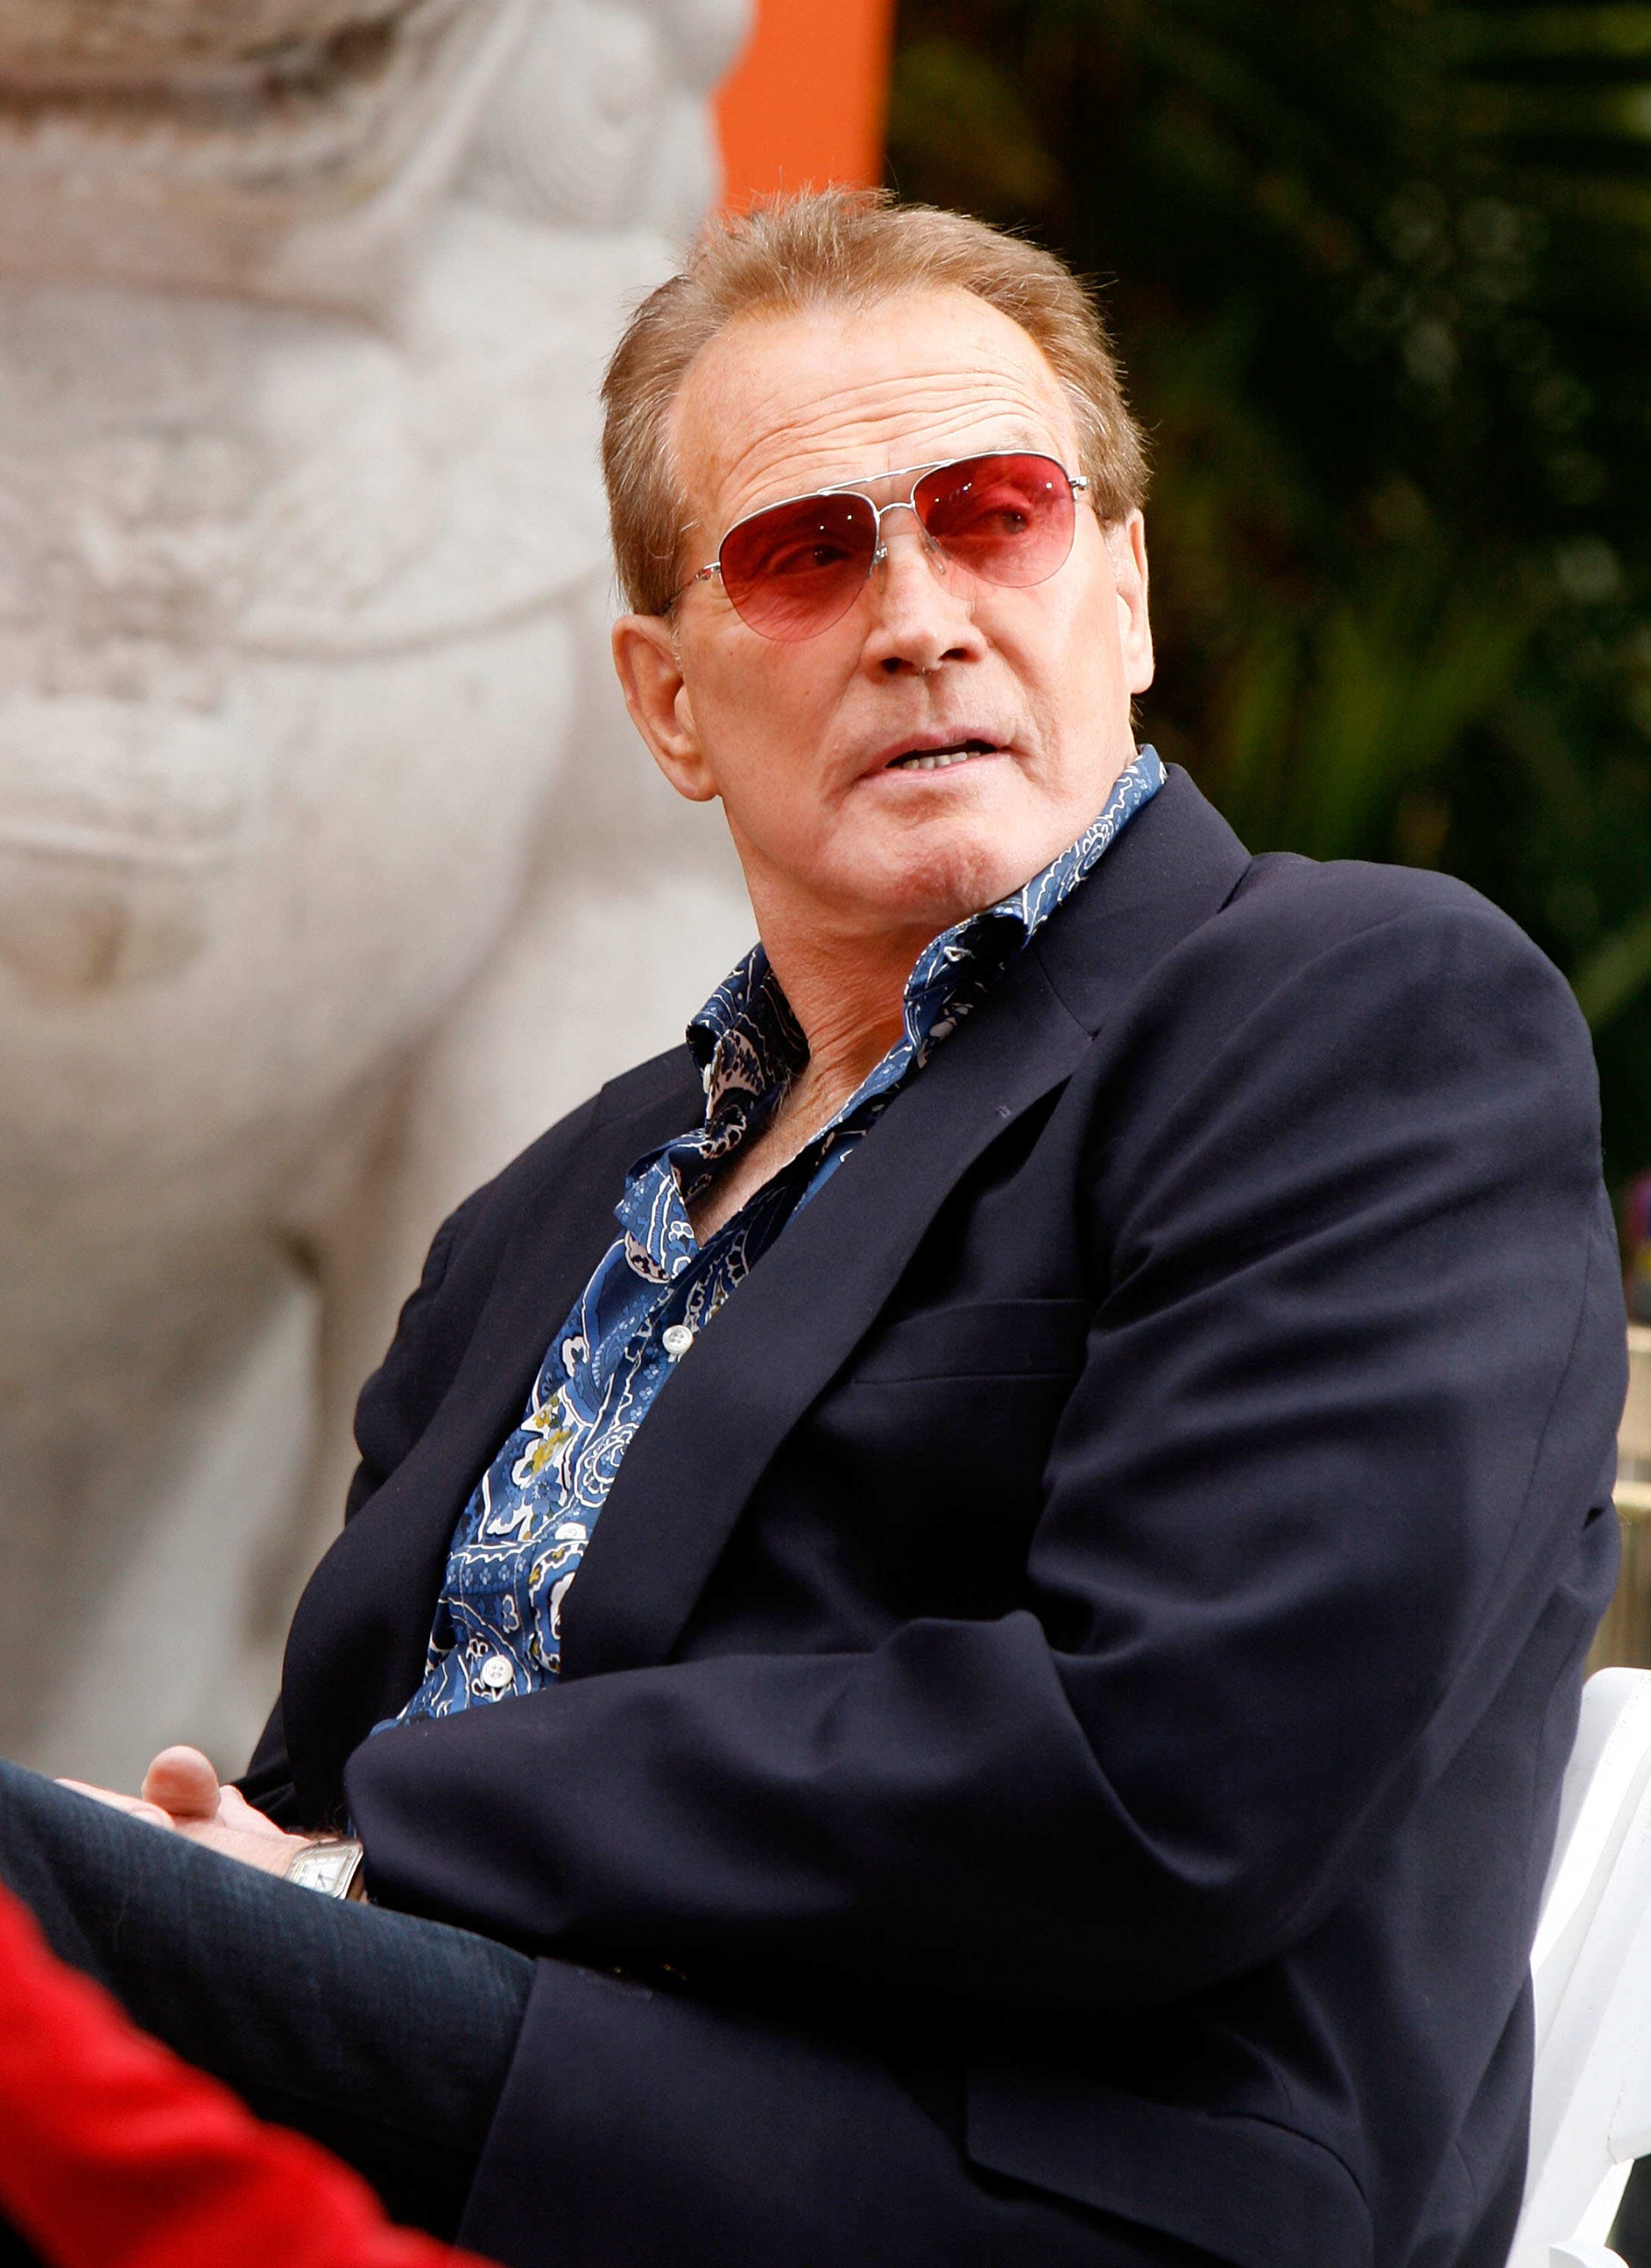 HOLLYWOOD - JUNE 05: Actor Lee Majors attends the Hand and Footprints Ceremony at Grauman's Chinese Theatre on June 5, 2007 in Hollywood, California. (Photo by Kevin Winter/Getty Images)